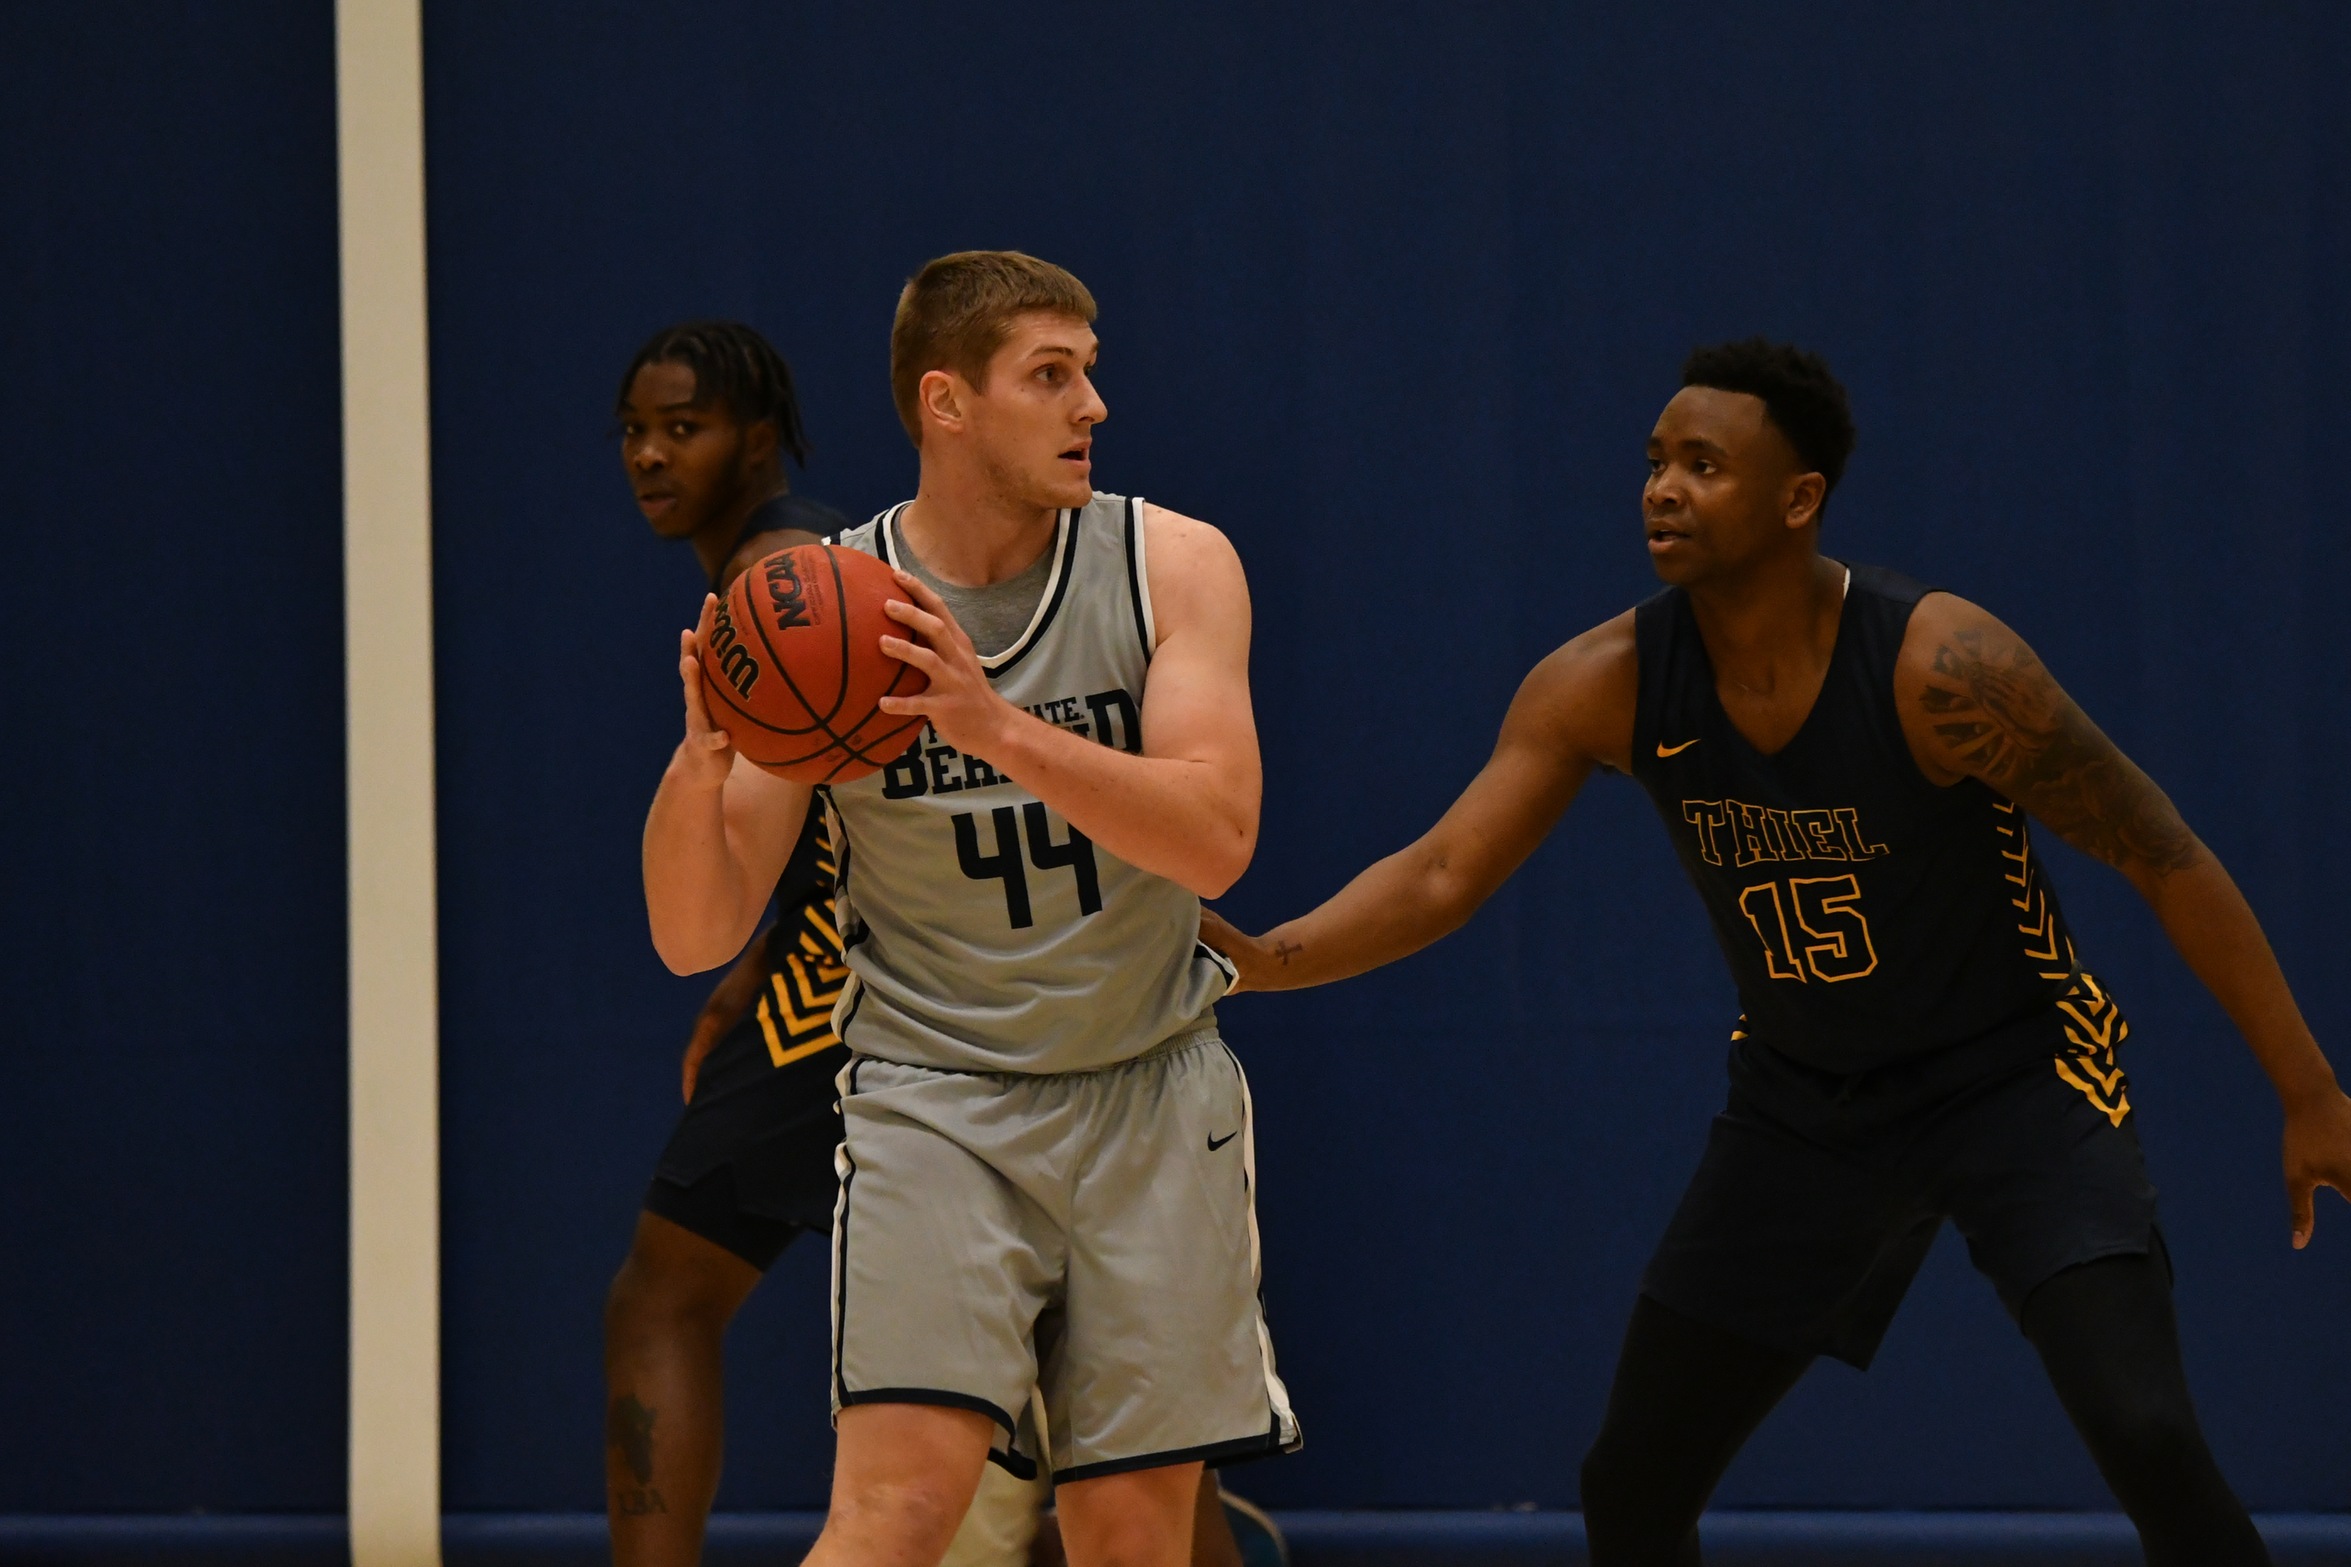 Gourley and Fukon Lead Lions as Men's Basketball Takes Down Bethany